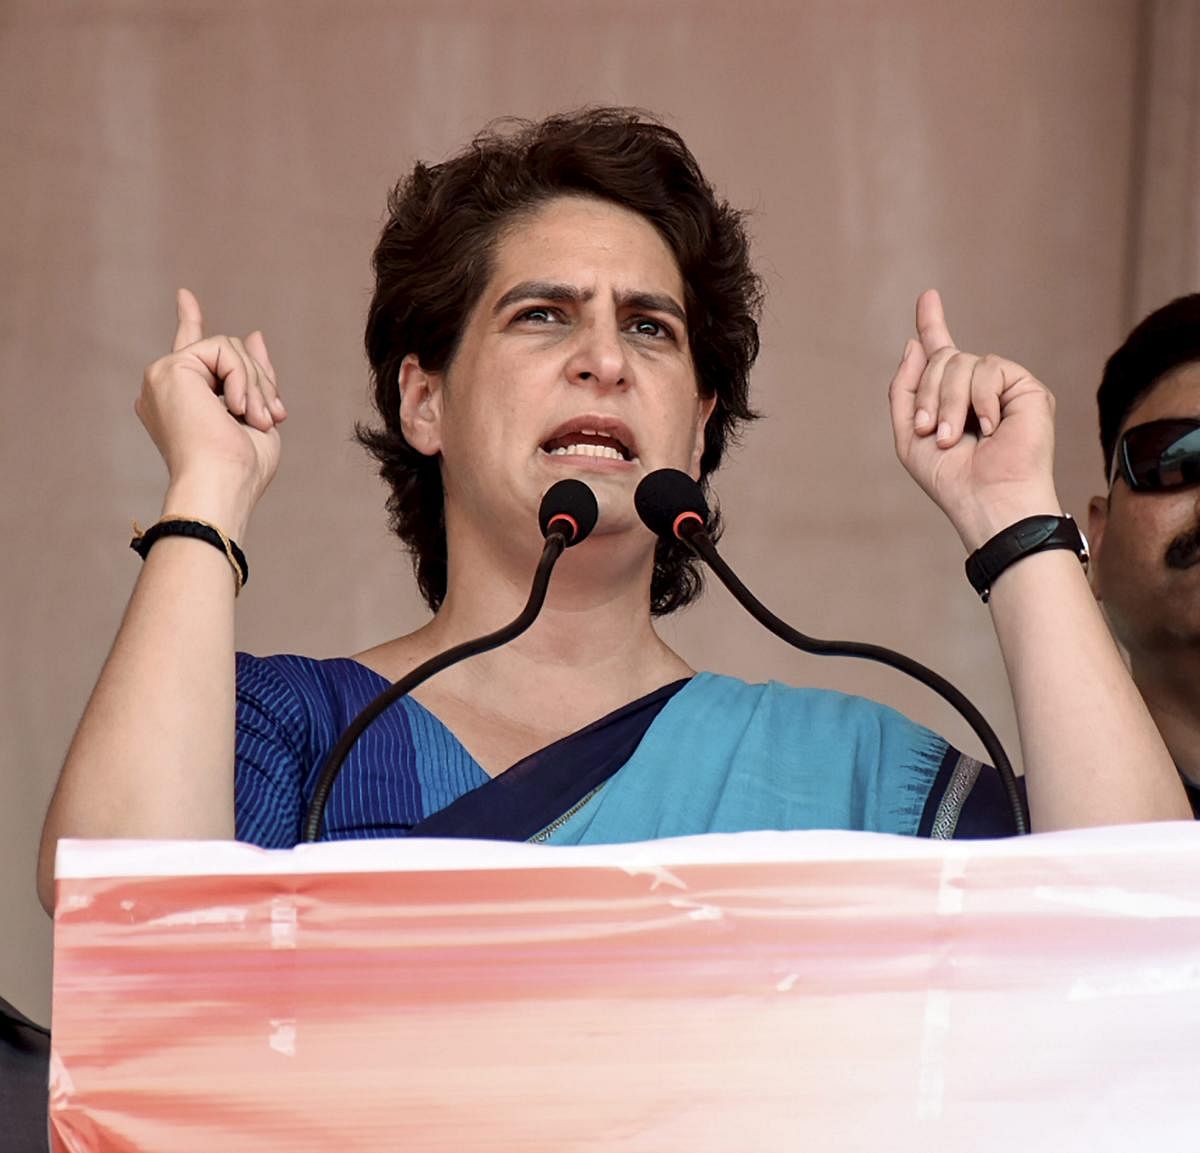 In a bid to ensure direct communication with the party workers, Priyanka Gandhi will meet them twice a week without prior appointments, the sources said. (PTI File Photo)